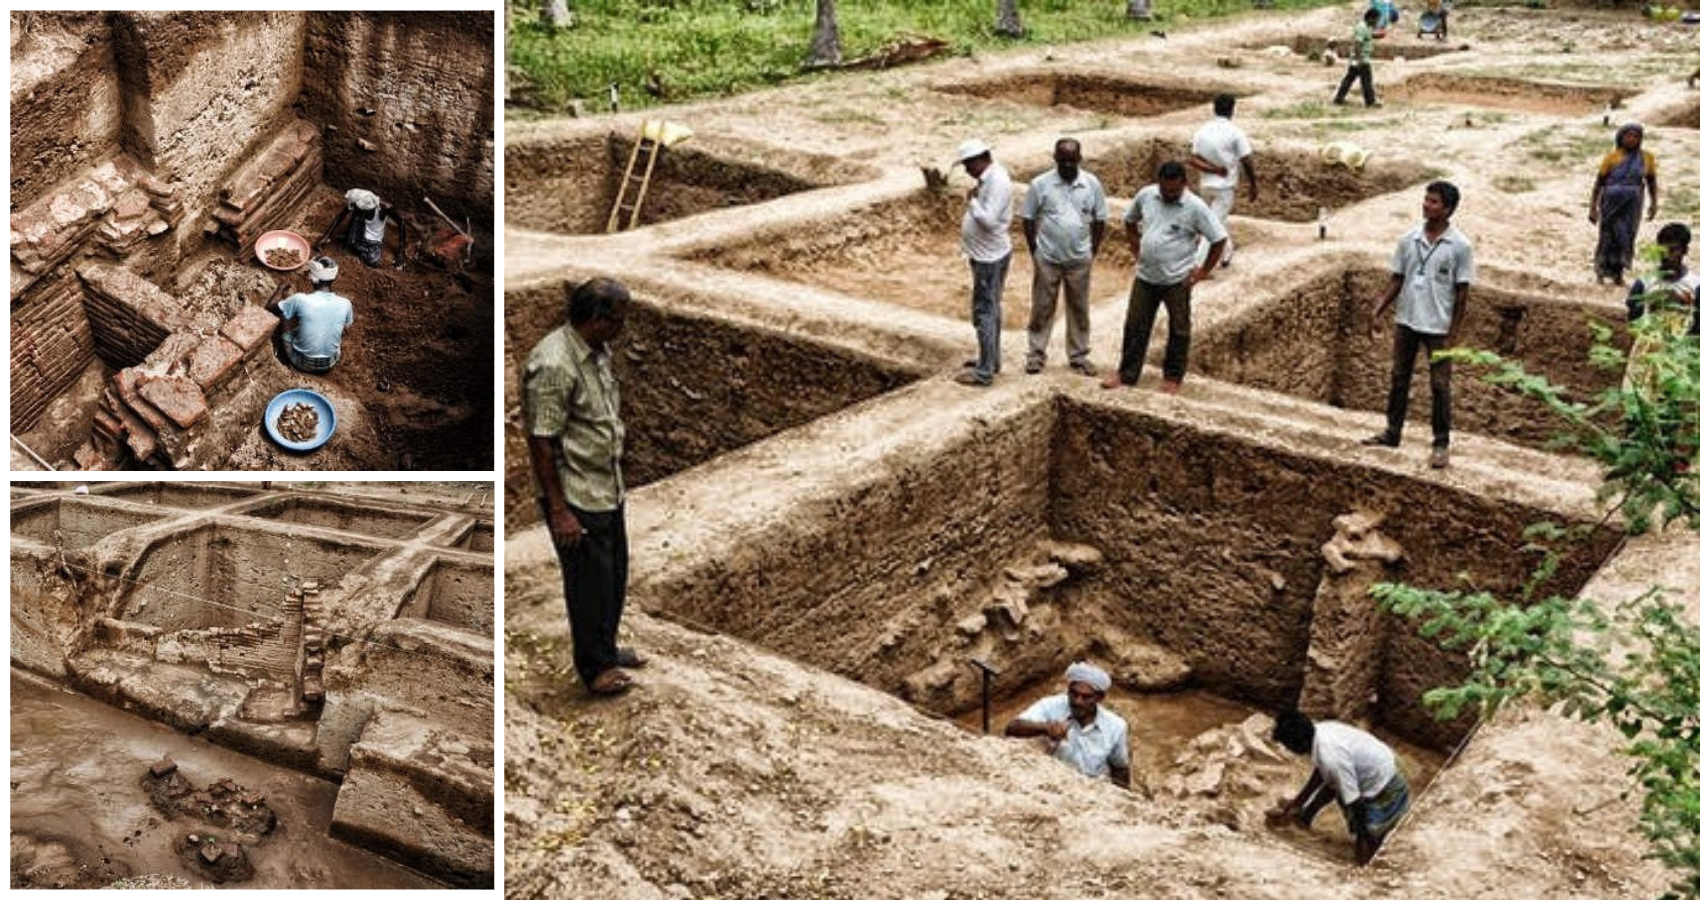 Harappa-like Site Surfaces in Tamil Nadu; 3,000 Ancient Artifacts Found